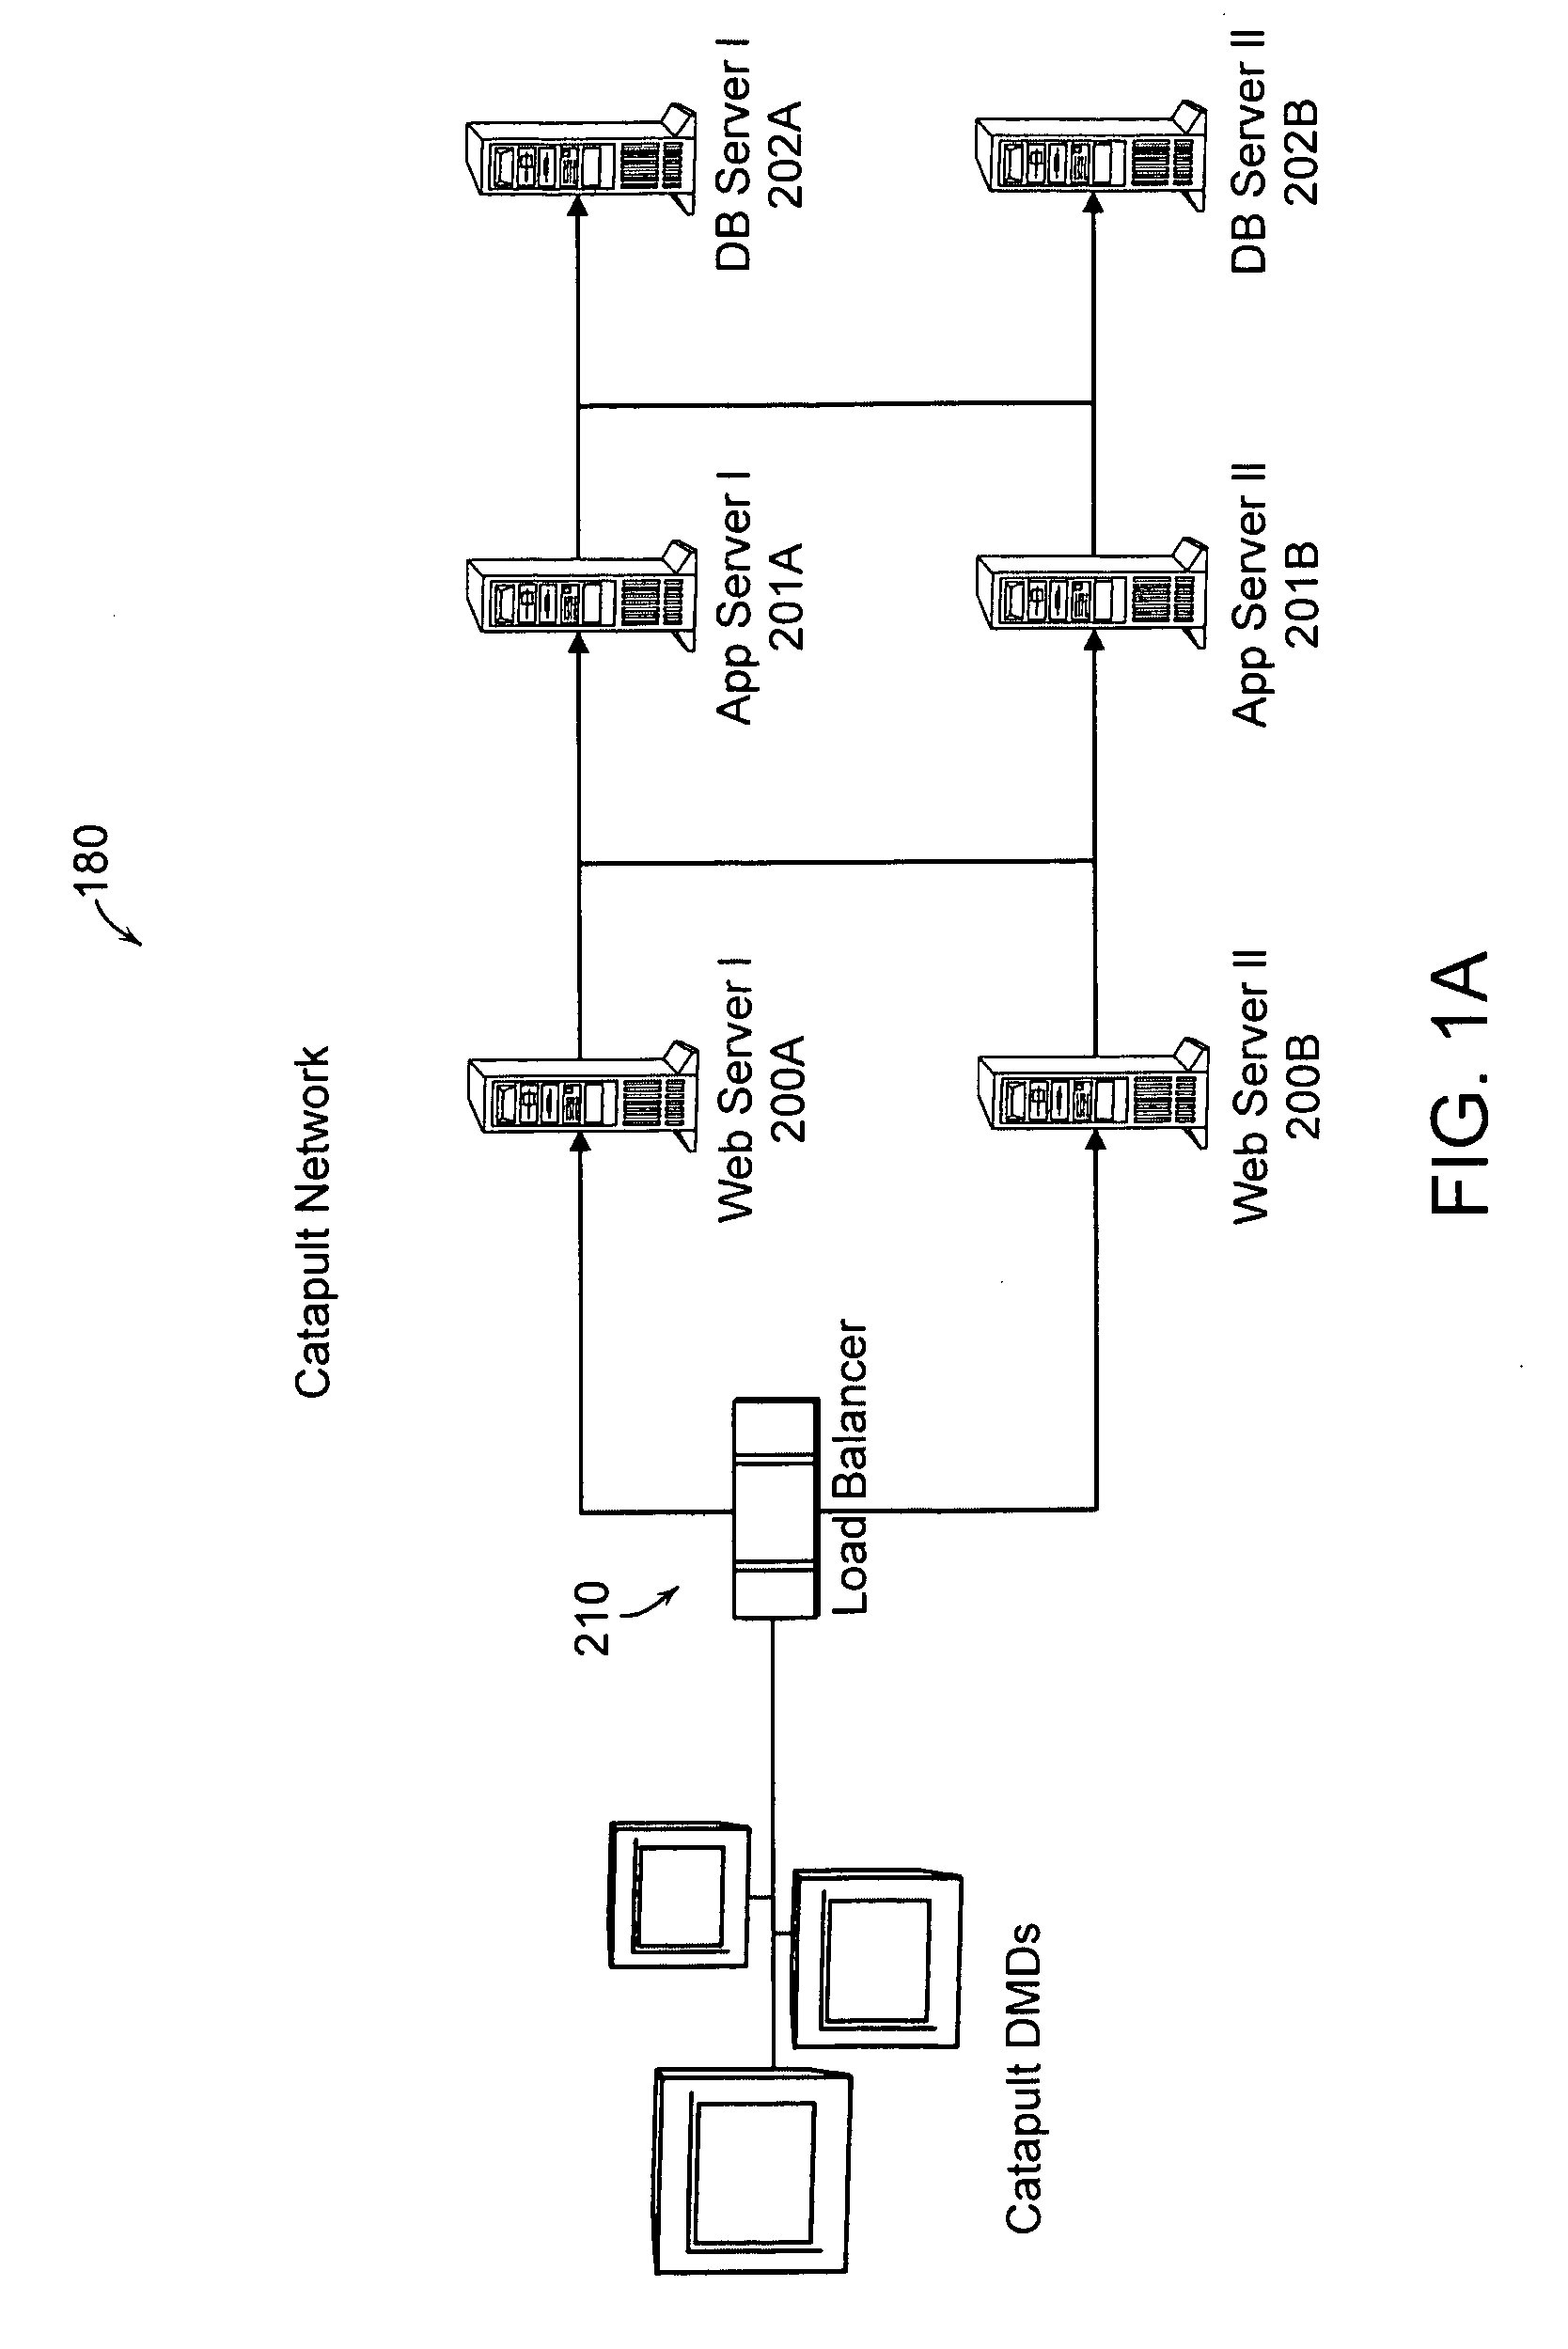 Apparatus and method for managing a network of intelligent devices